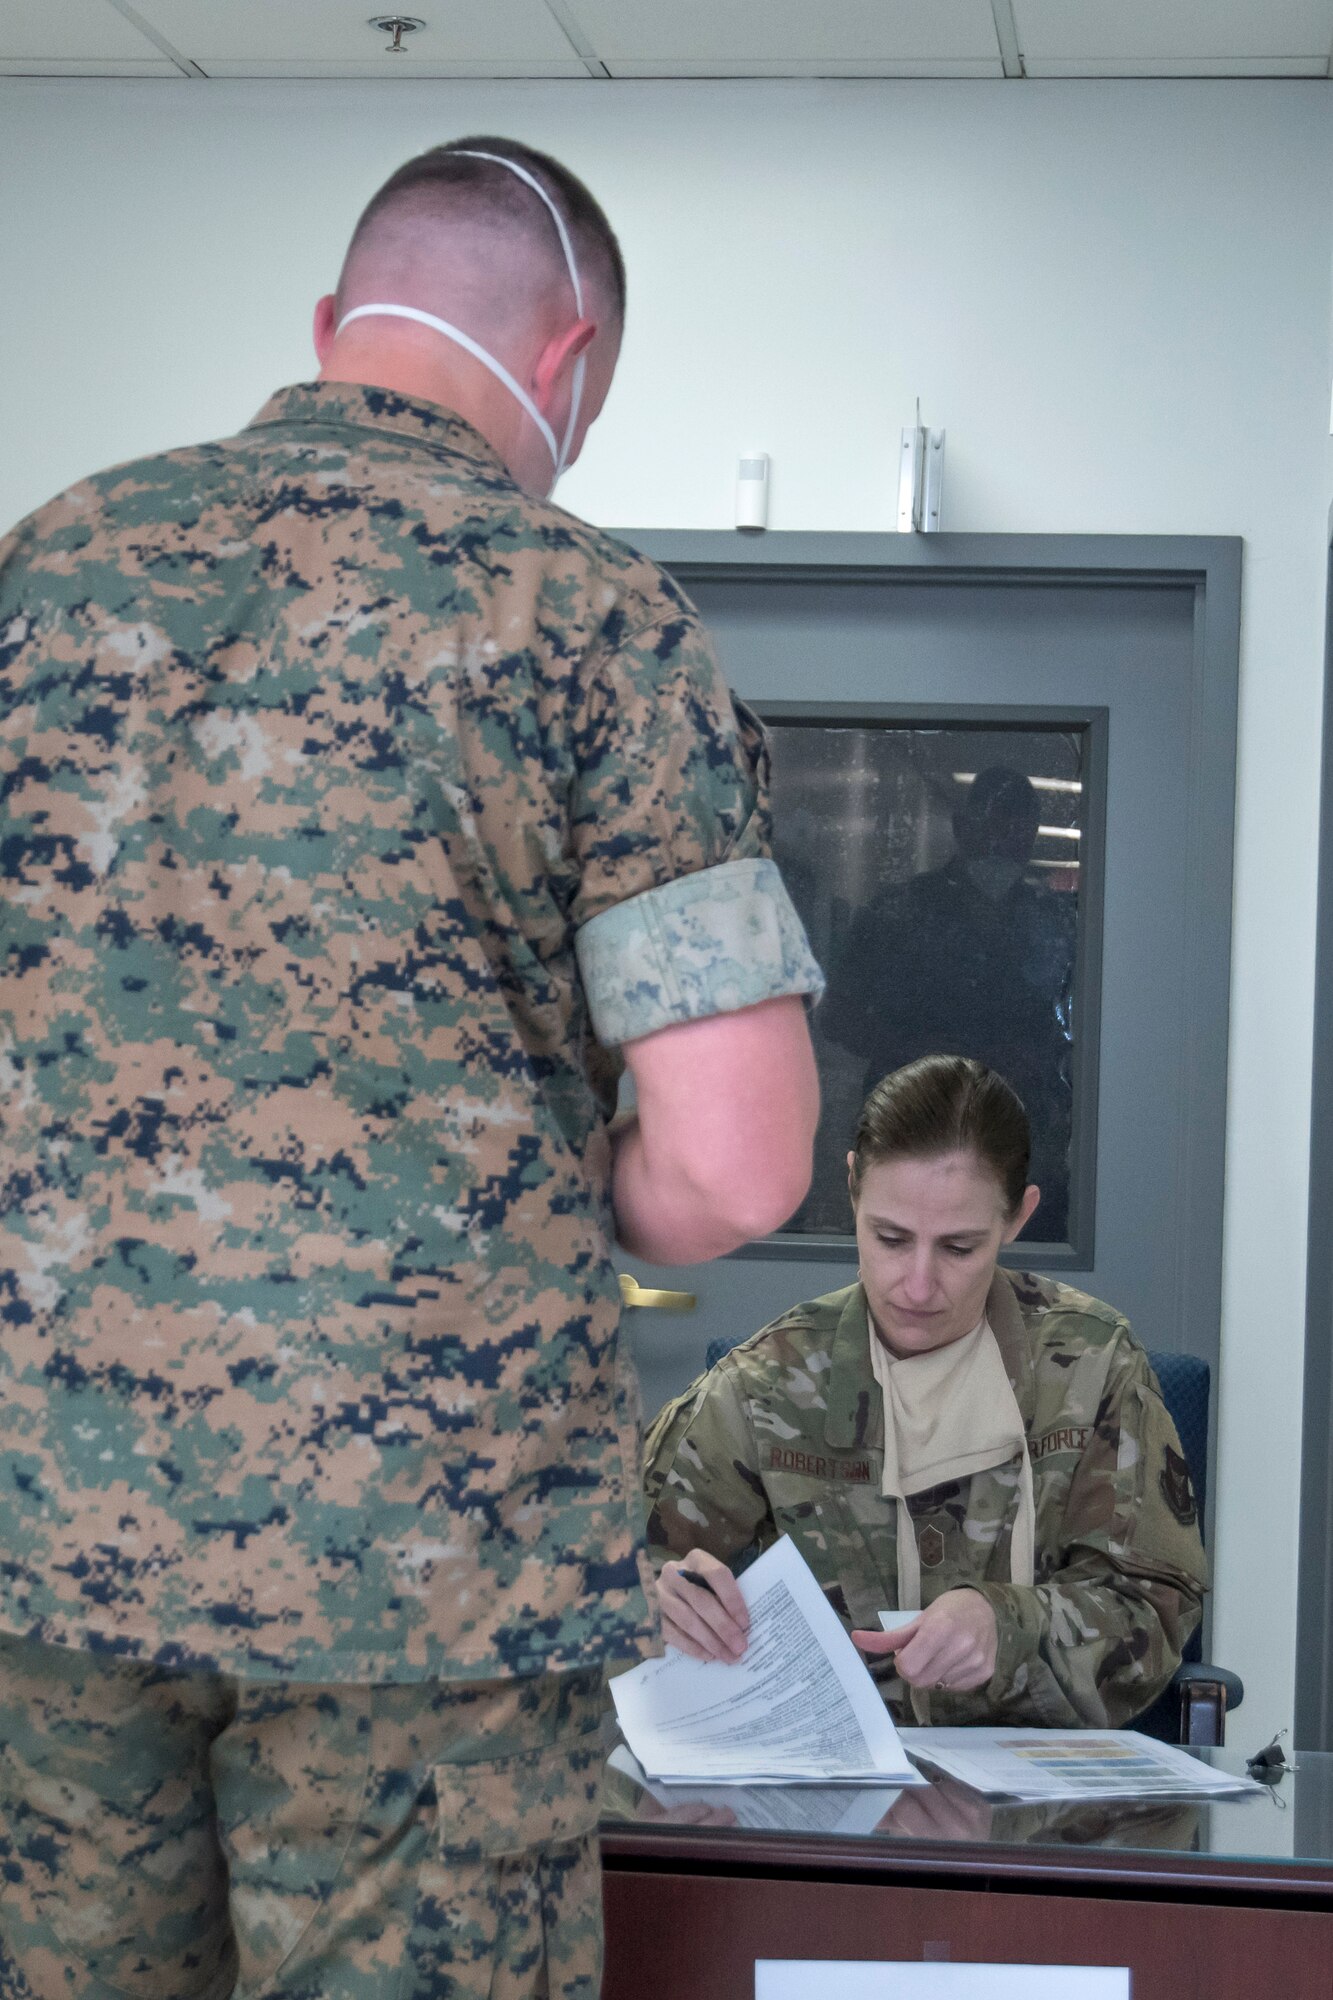 Chief Master Sgt. Vicki Robertson, 94th Airlift Wing command chief, registers a Marine as he arrives to meet with the Dobbins legal team on April 9, 2020. This week, the Dobbins legal office helped more than 60 Marines with legal documents in preparation for a short-notice deployment to assist in the battle against COVID-19. Due to the short notice, the command chief stepped in to help the legal team. (U.S. Air Force photo/Andrew Park)